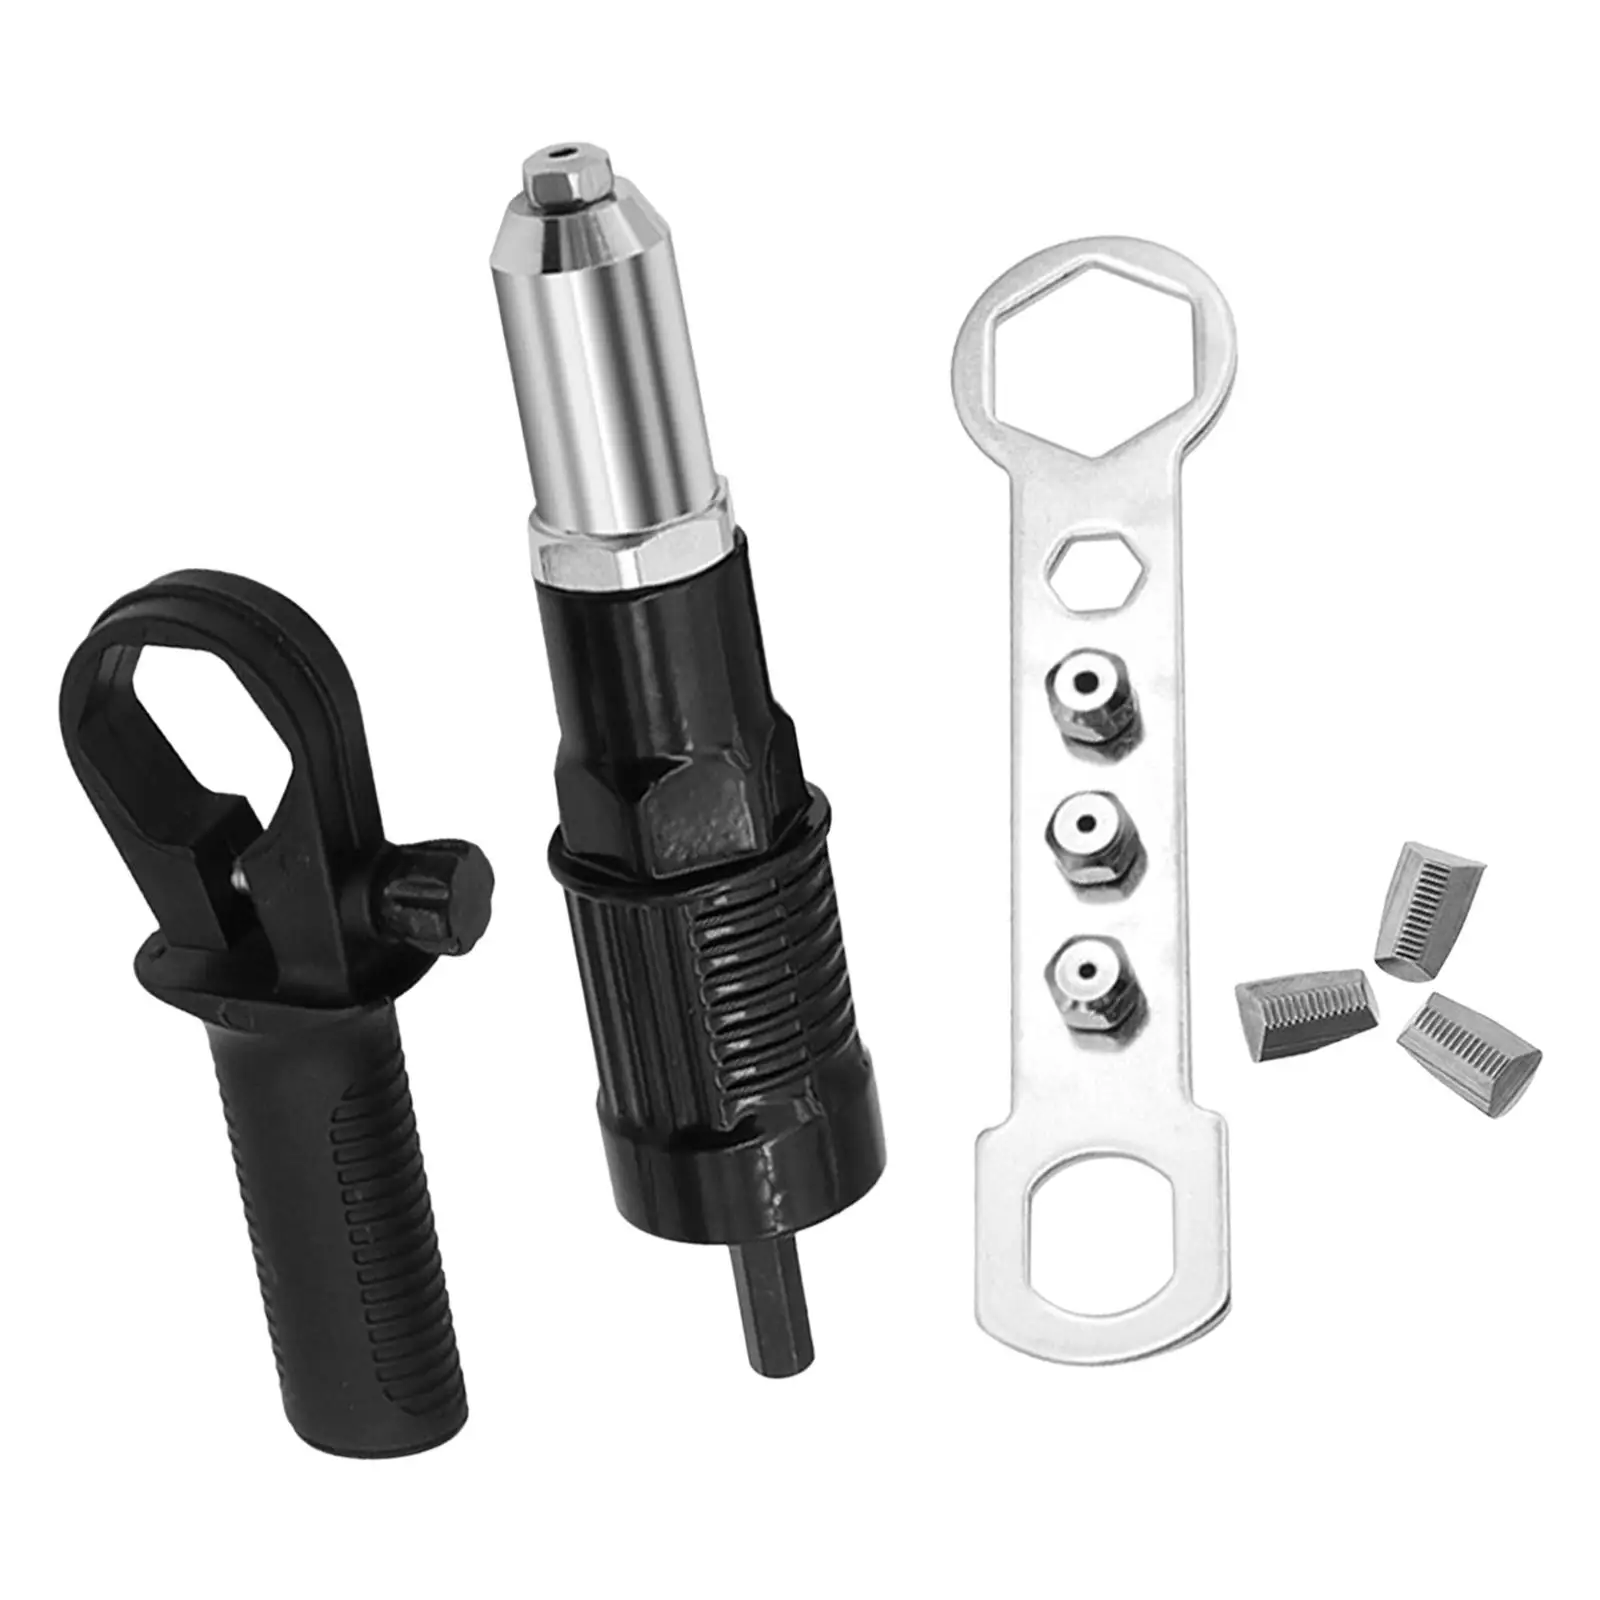 Rivet Connector Accessories Cordless Riveting Drill Joint Adapter Pulling Rivet Machine Joint Pull Riveting Machine Core